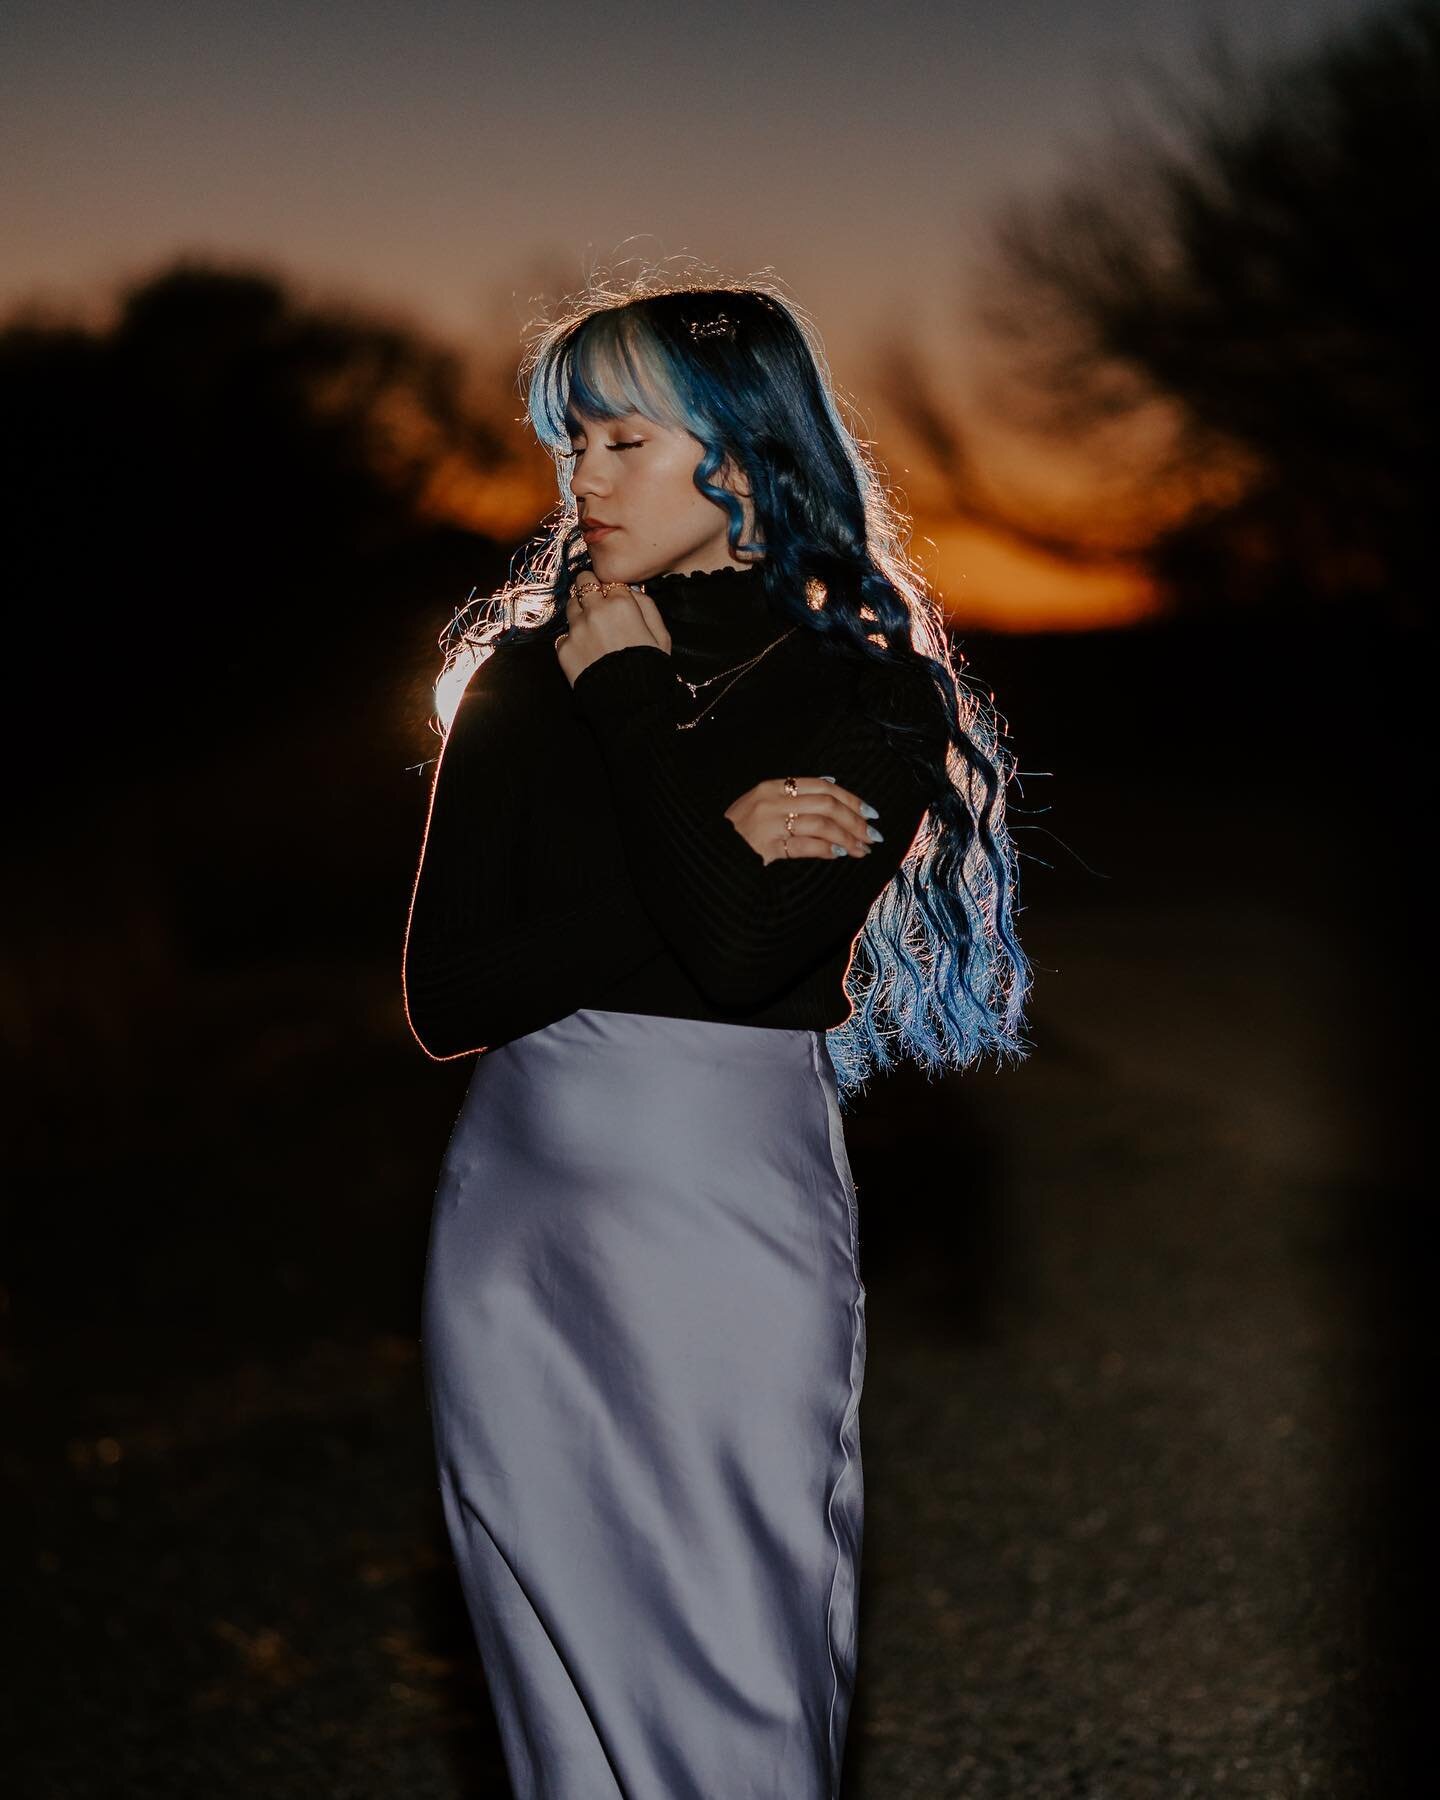 We only had about 20 mins of light remaining when Angelina and I pulled up to the park so I knew I wanted to play with some off camera flash in the dark to get the most out of our time together. Which I was minorly (read&mdash; majorly) internally fr